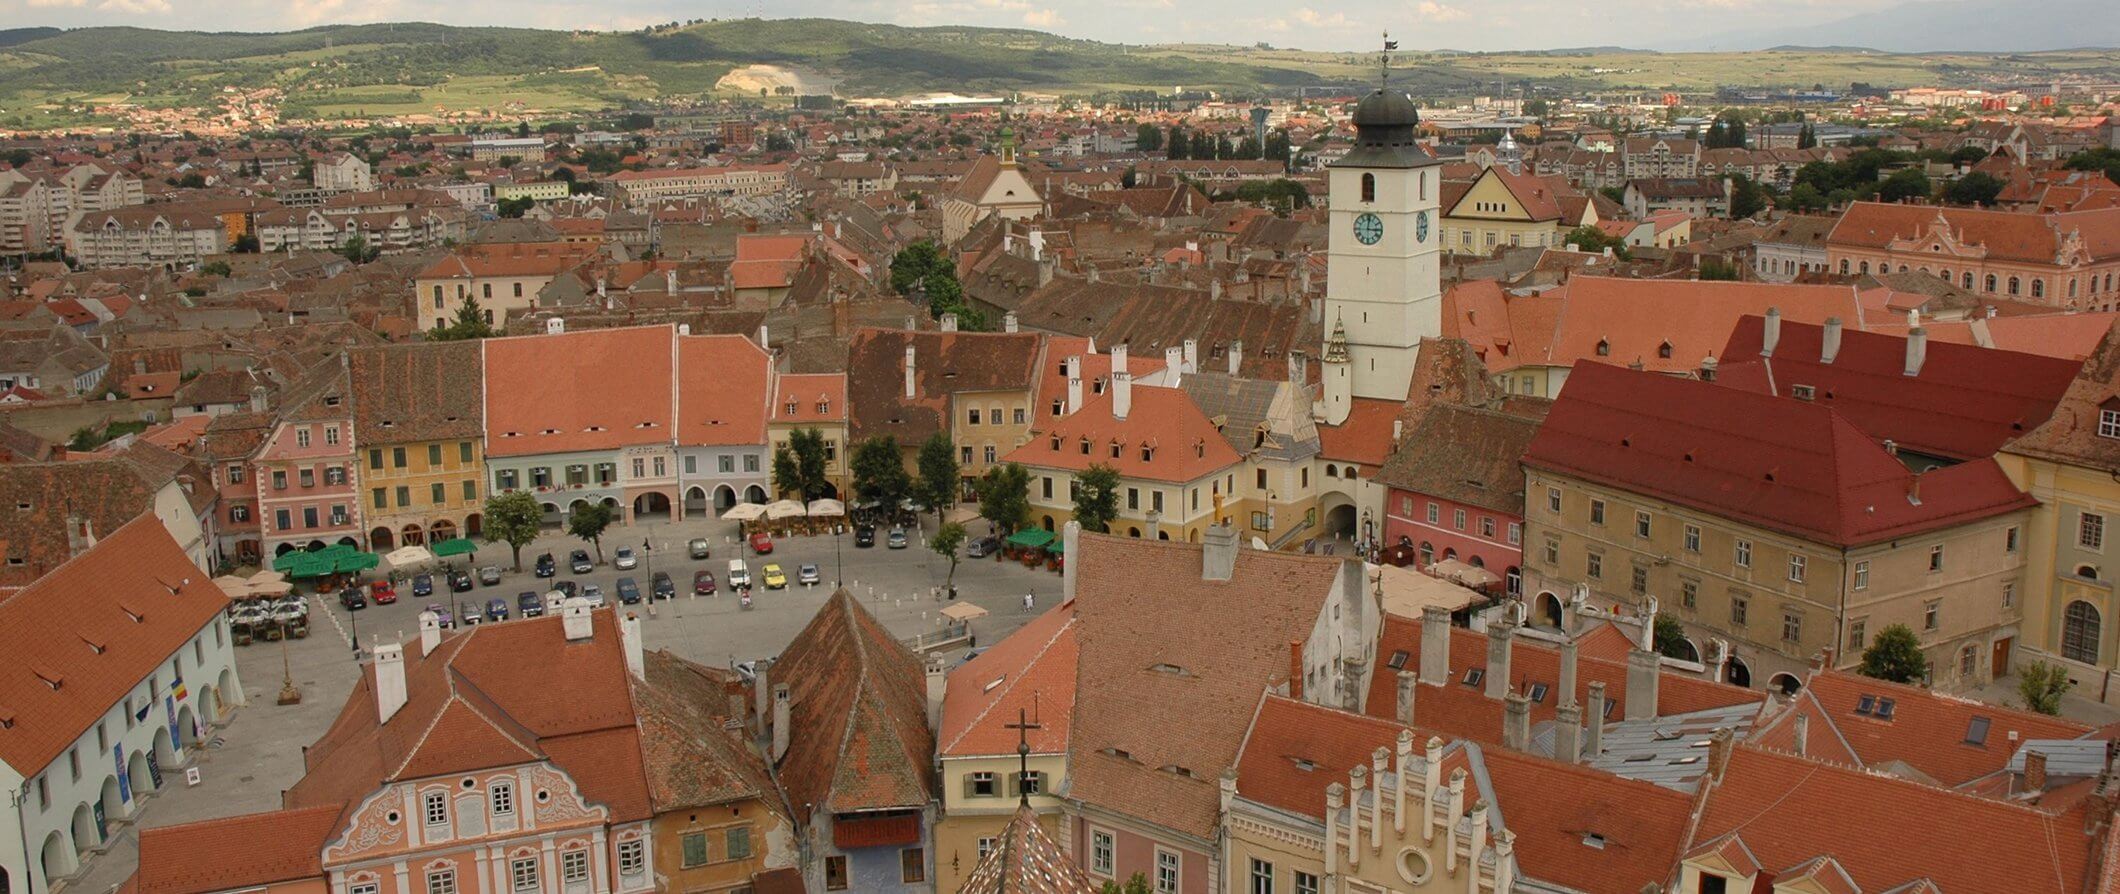 city view of Sibiu looking down over buildings and a car park